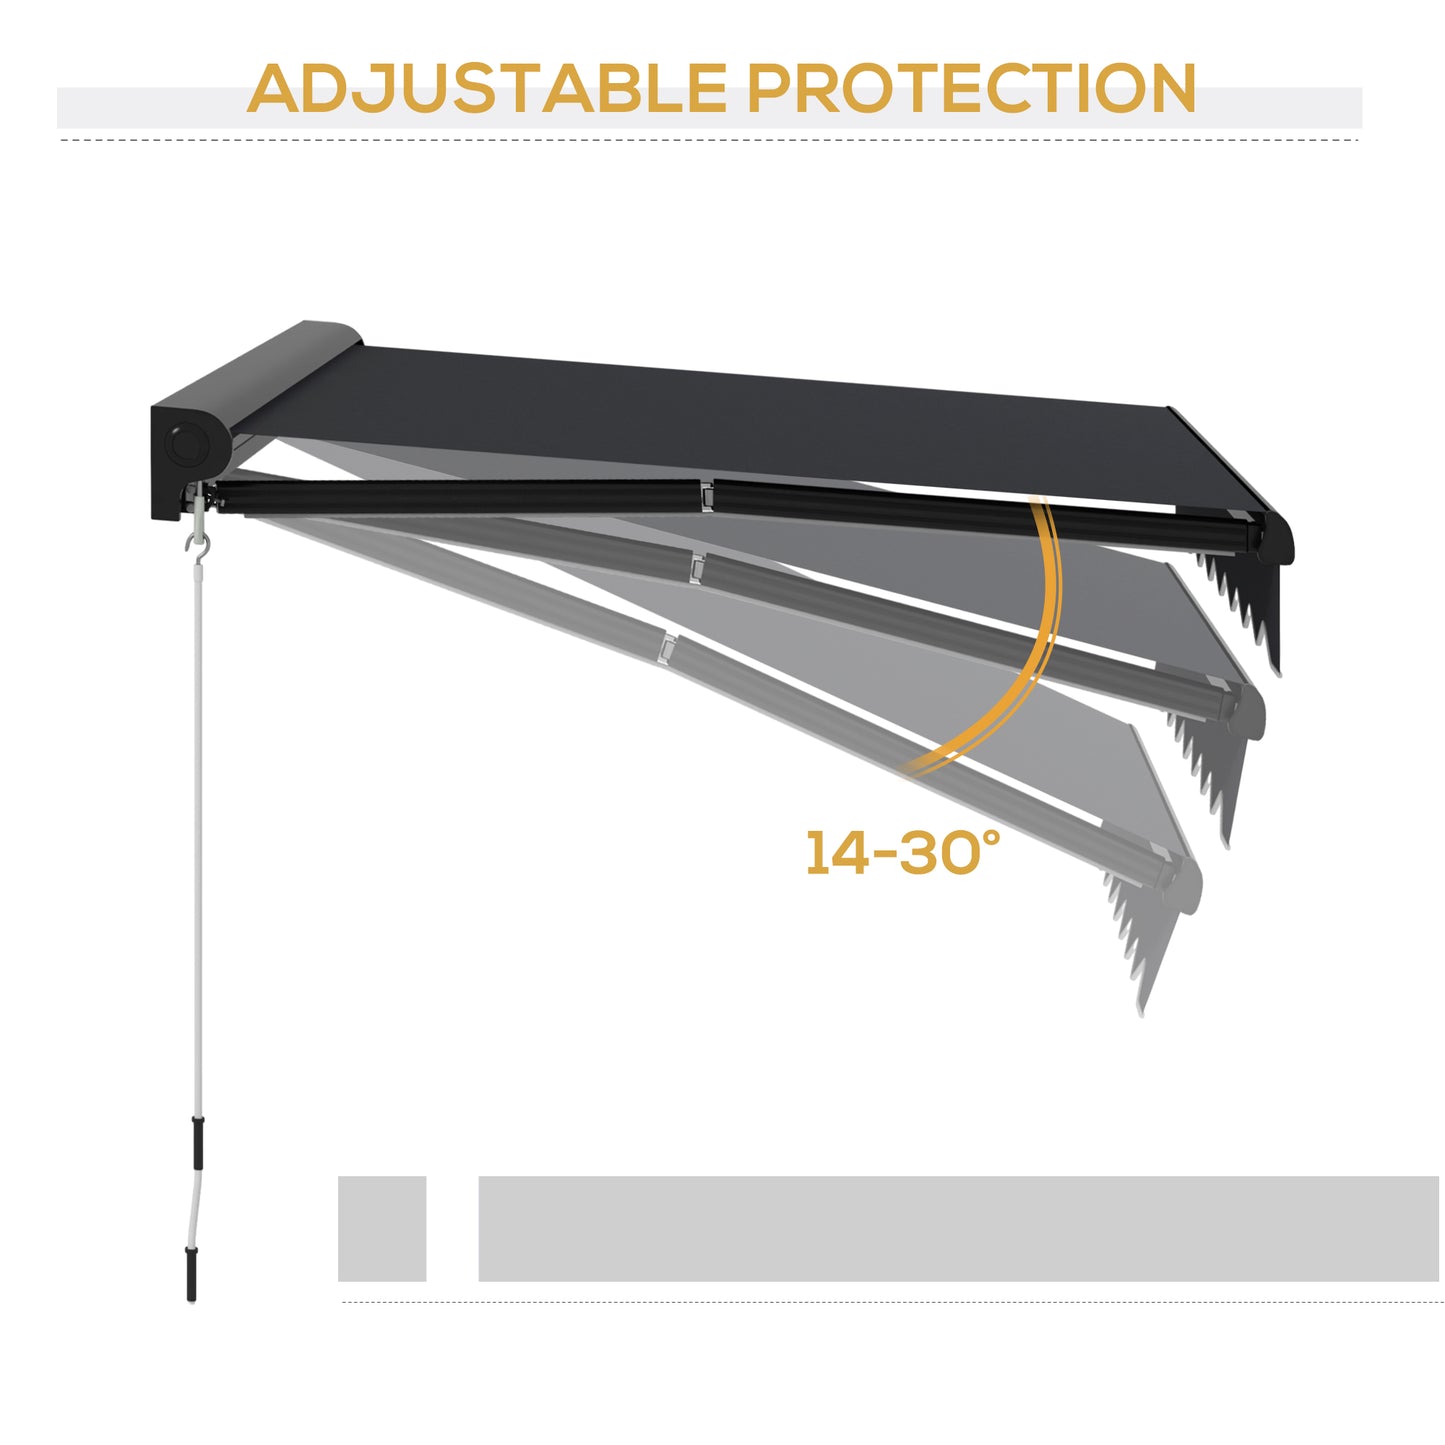 Outsunny 3 x 2.5m Electric Awning with LED Light, Aluminium Frame Retractable Awning Sun Canopies for Patio Door Window